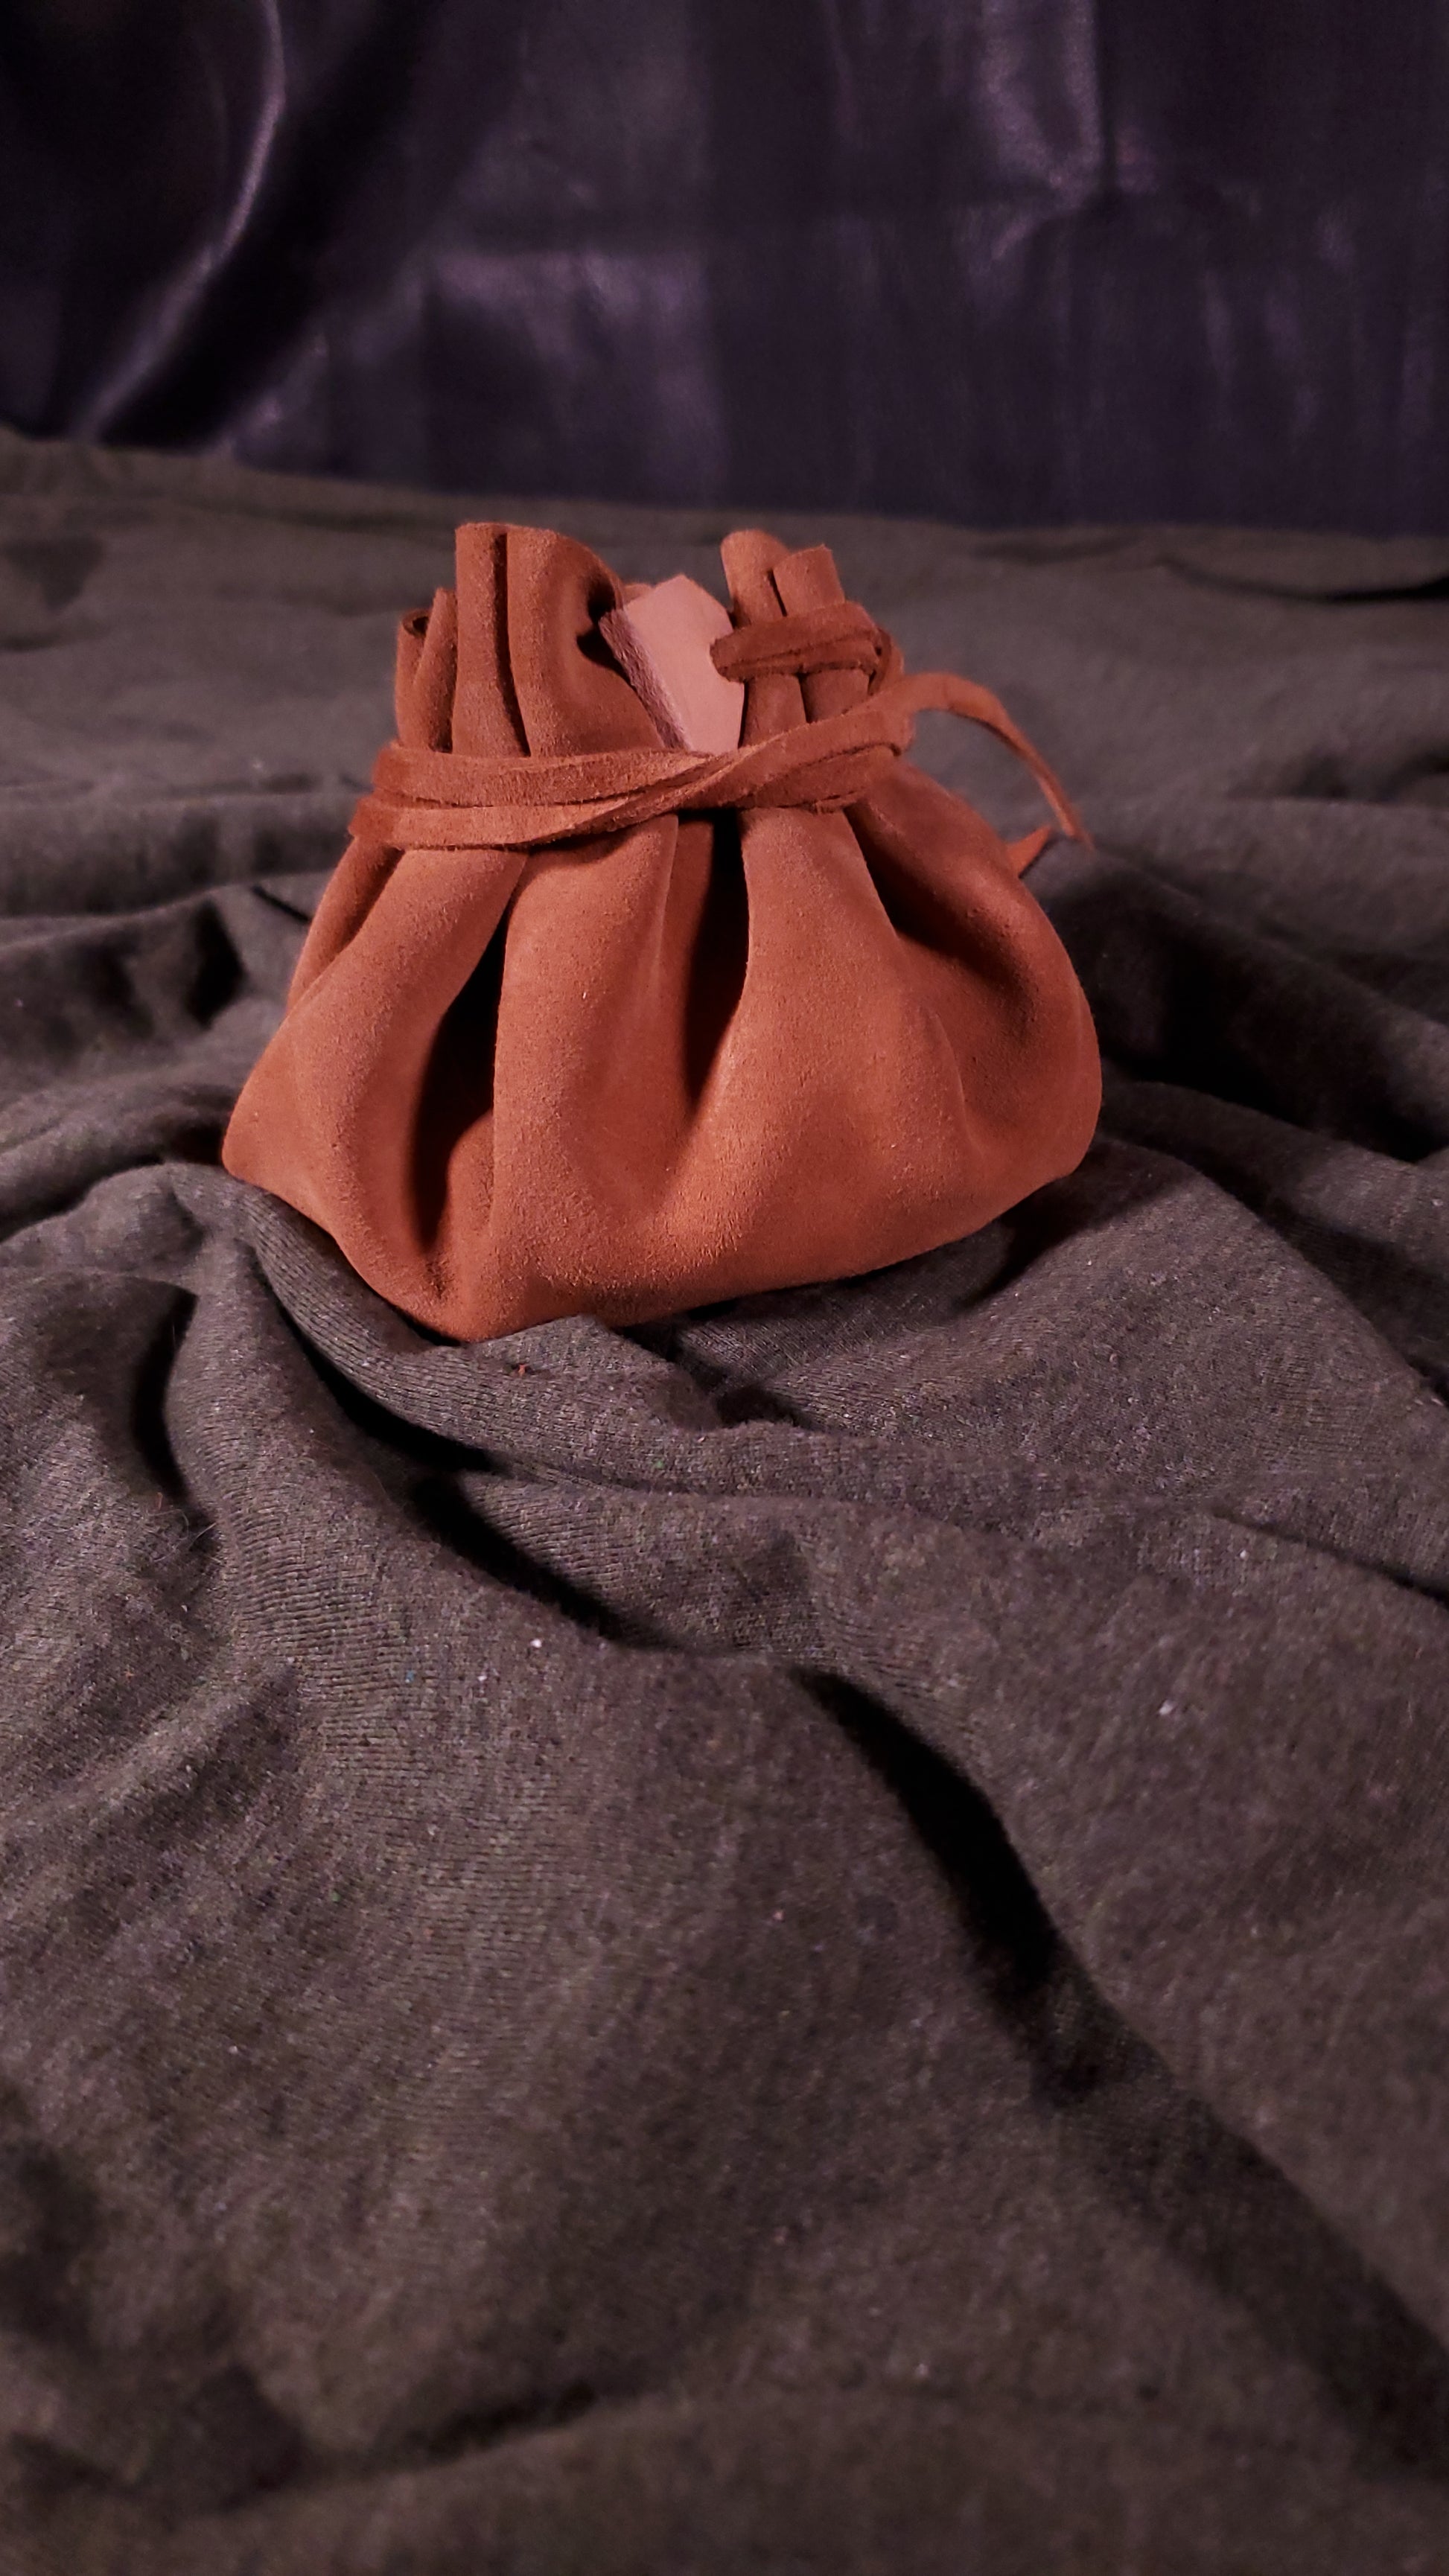 Closed suede dice bag in a light brown color